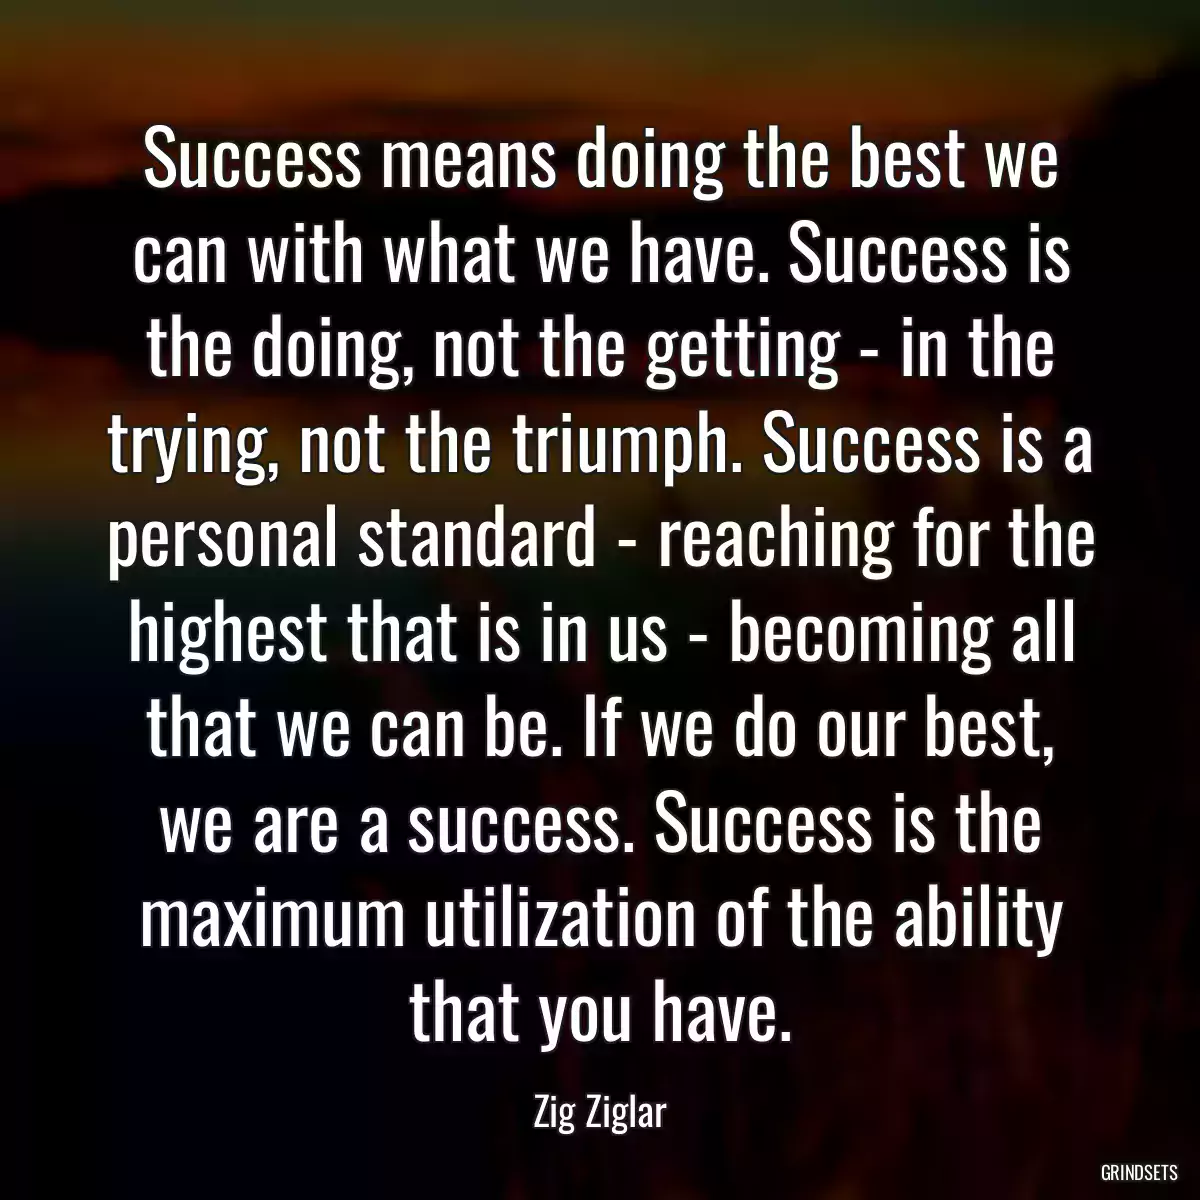 Success means doing the best we can with what we have. Success is the doing, not the getting - in the trying, not the triumph. Success is a personal standard - reaching for the highest that is in us - becoming all that we can be. If we do our best, we are a success. Success is the maximum utilization of the ability that you have.